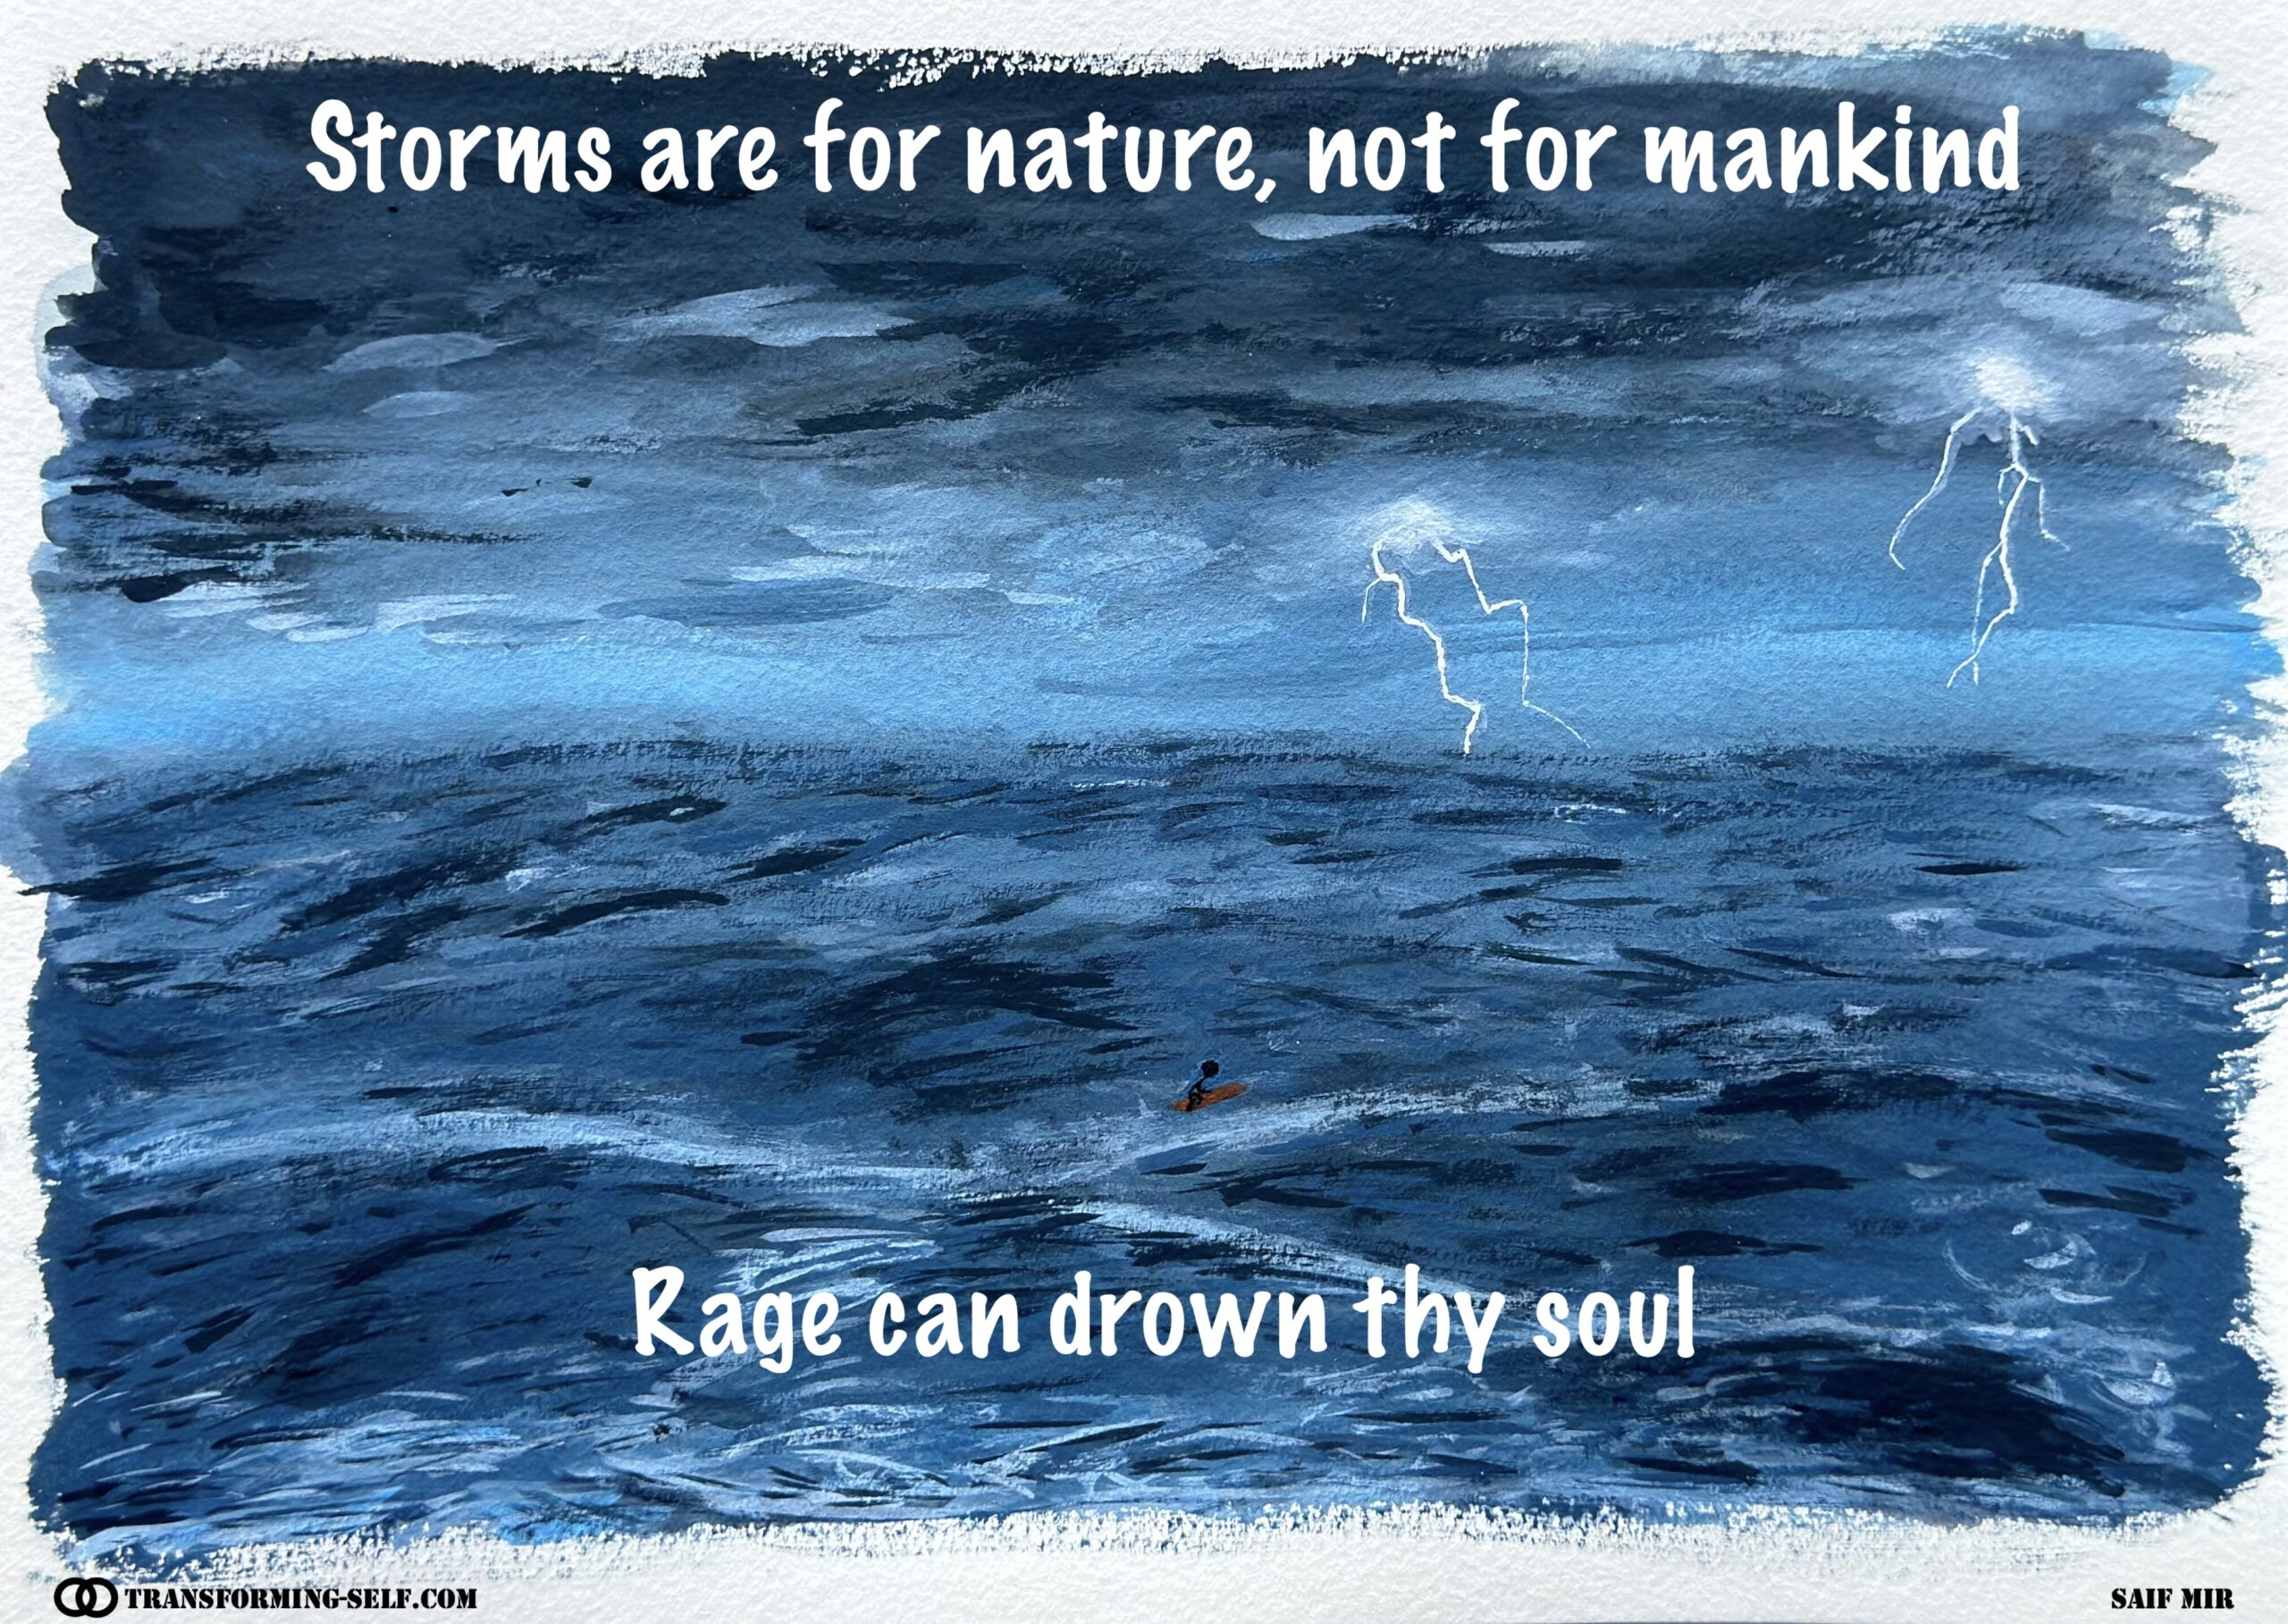 Storms are for nature, not for mankind. Rage can drown thy soul.